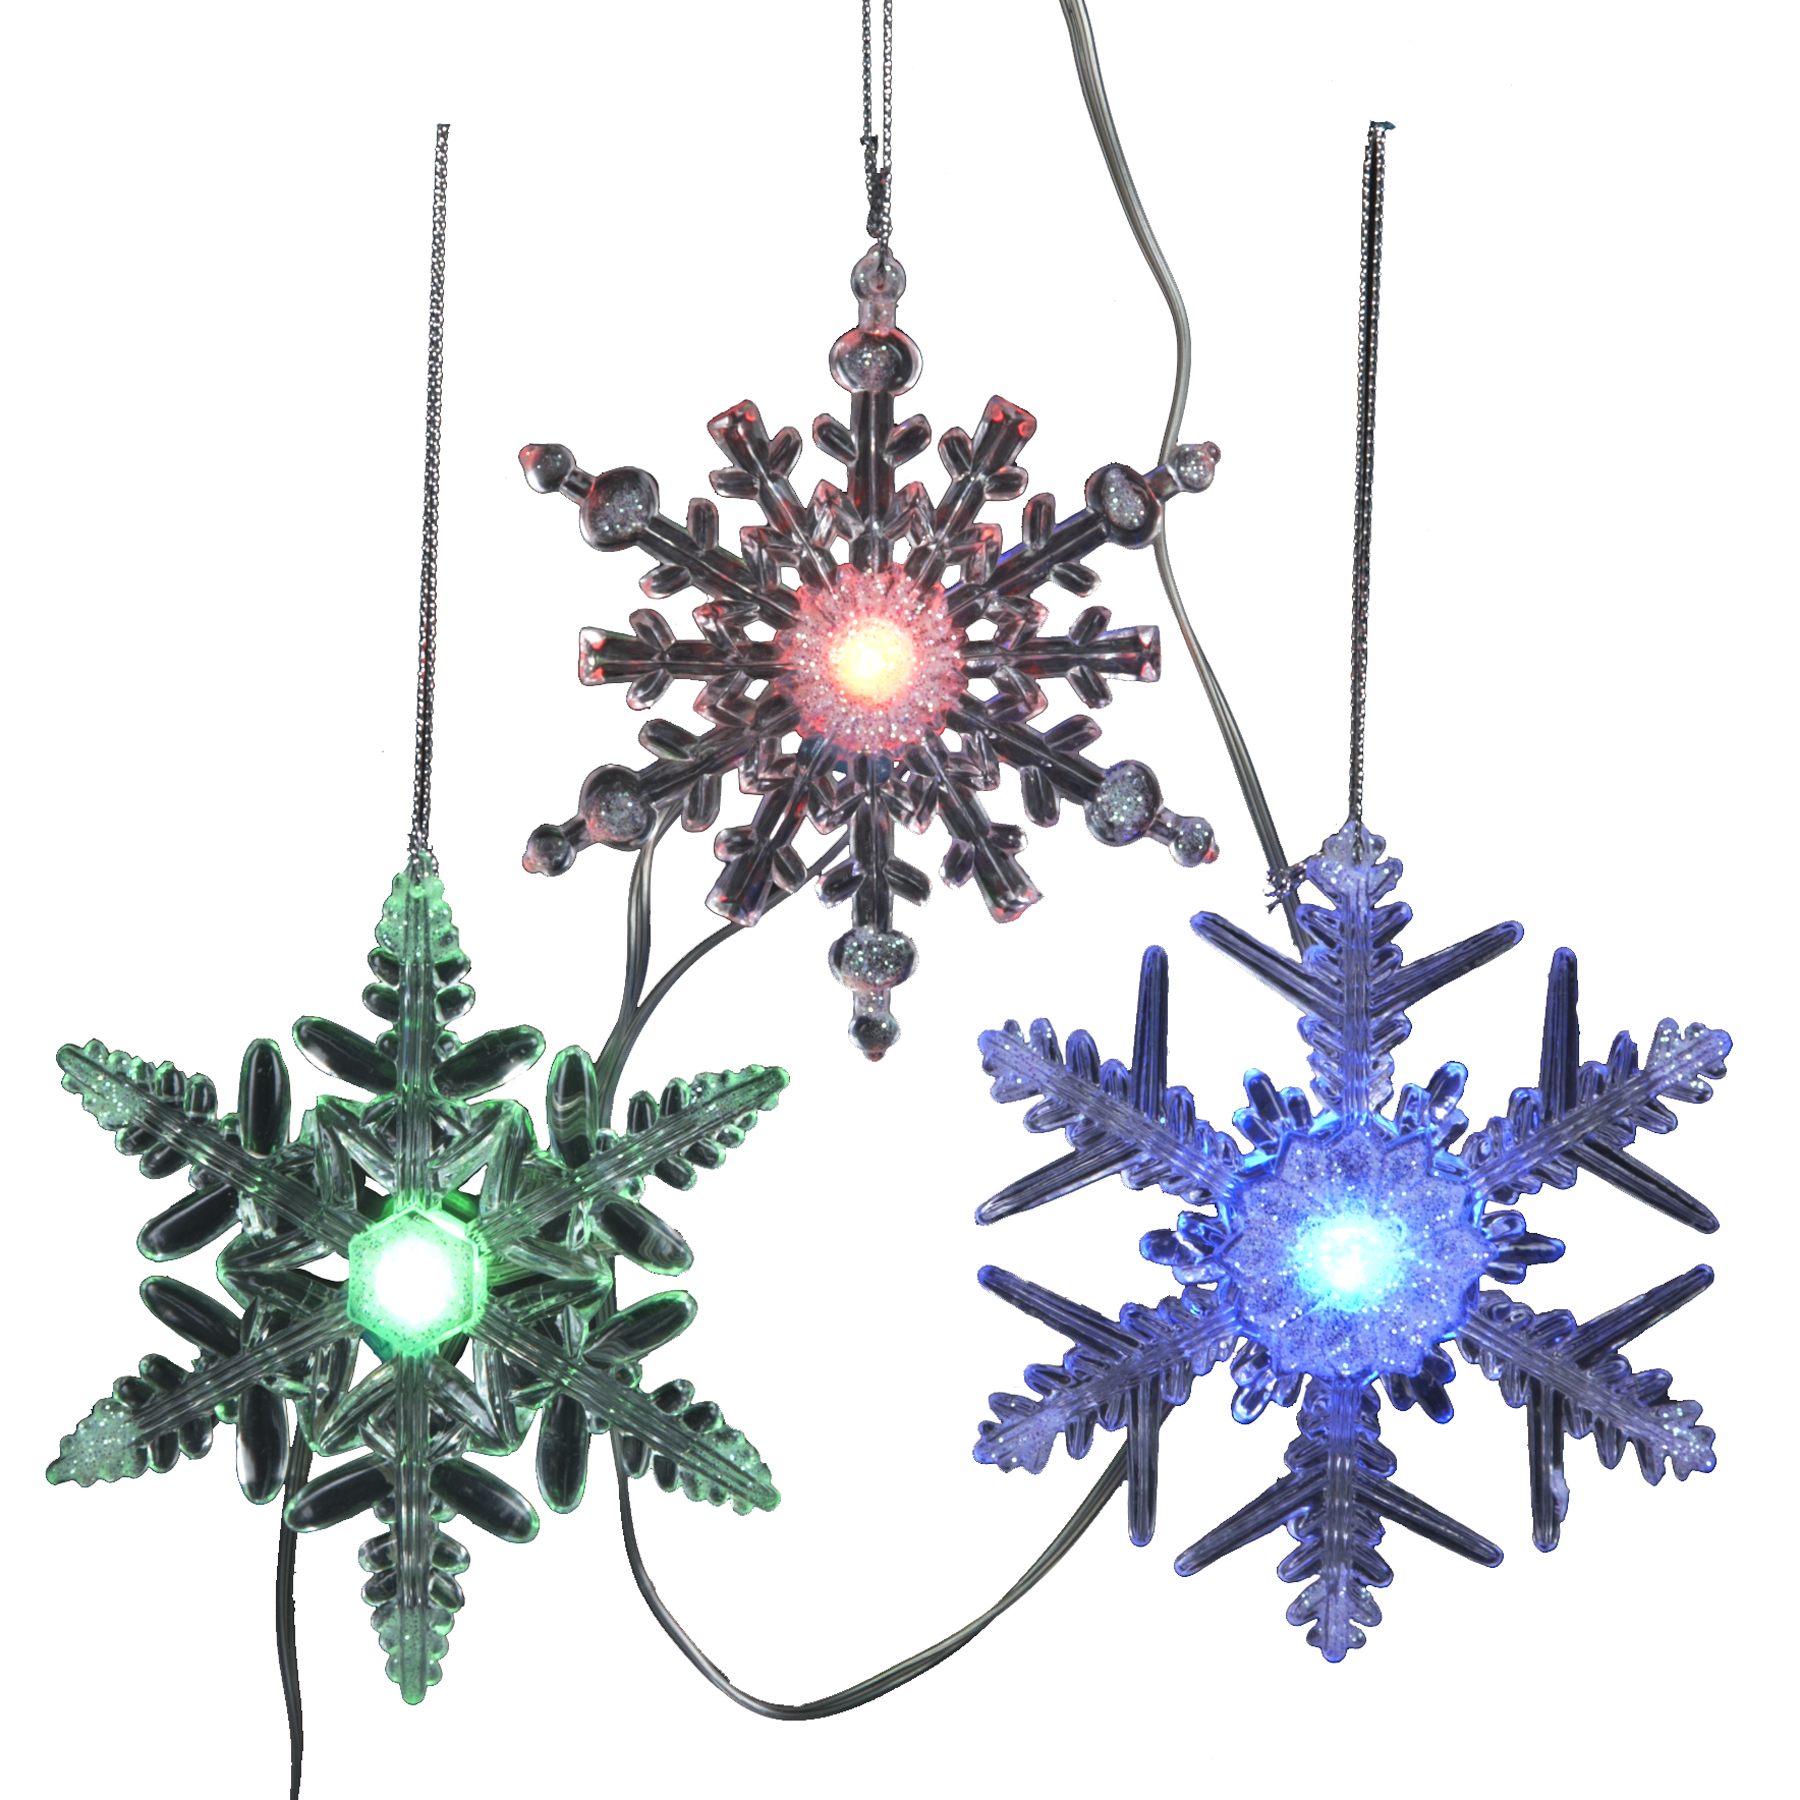 Battery-Operated LED Snowflake Musical Party Light Set